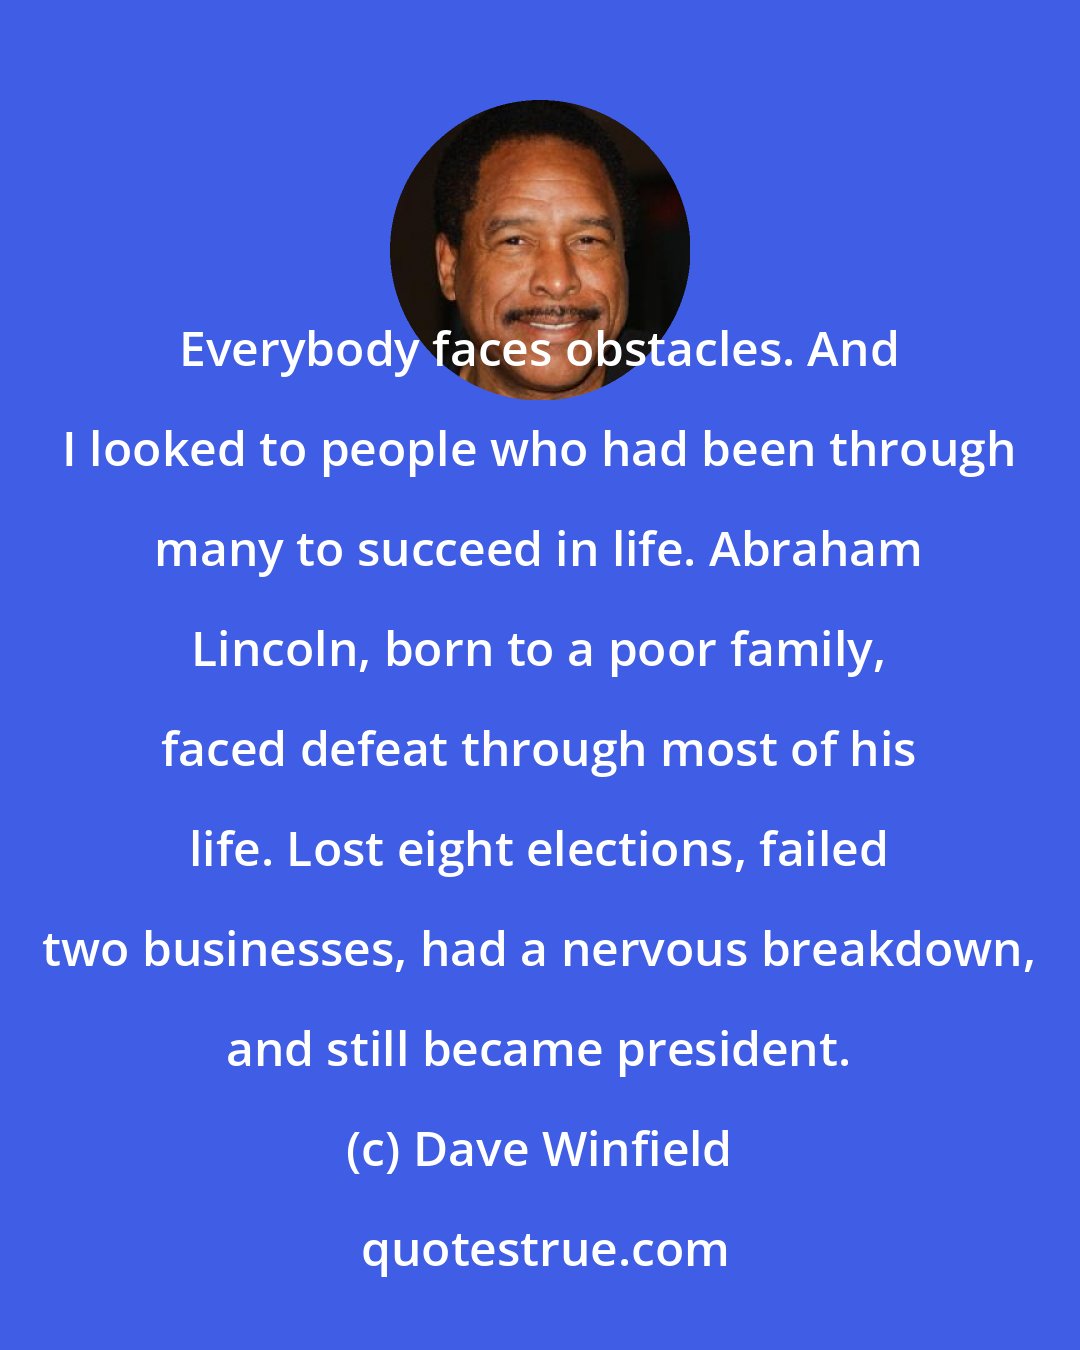 Dave Winfield: Everybody faces obstacles. And I looked to people who had been through many to succeed in life. Abraham Lincoln, born to a poor family, faced defeat through most of his life. Lost eight elections, failed two businesses, had a nervous breakdown, and still became president.